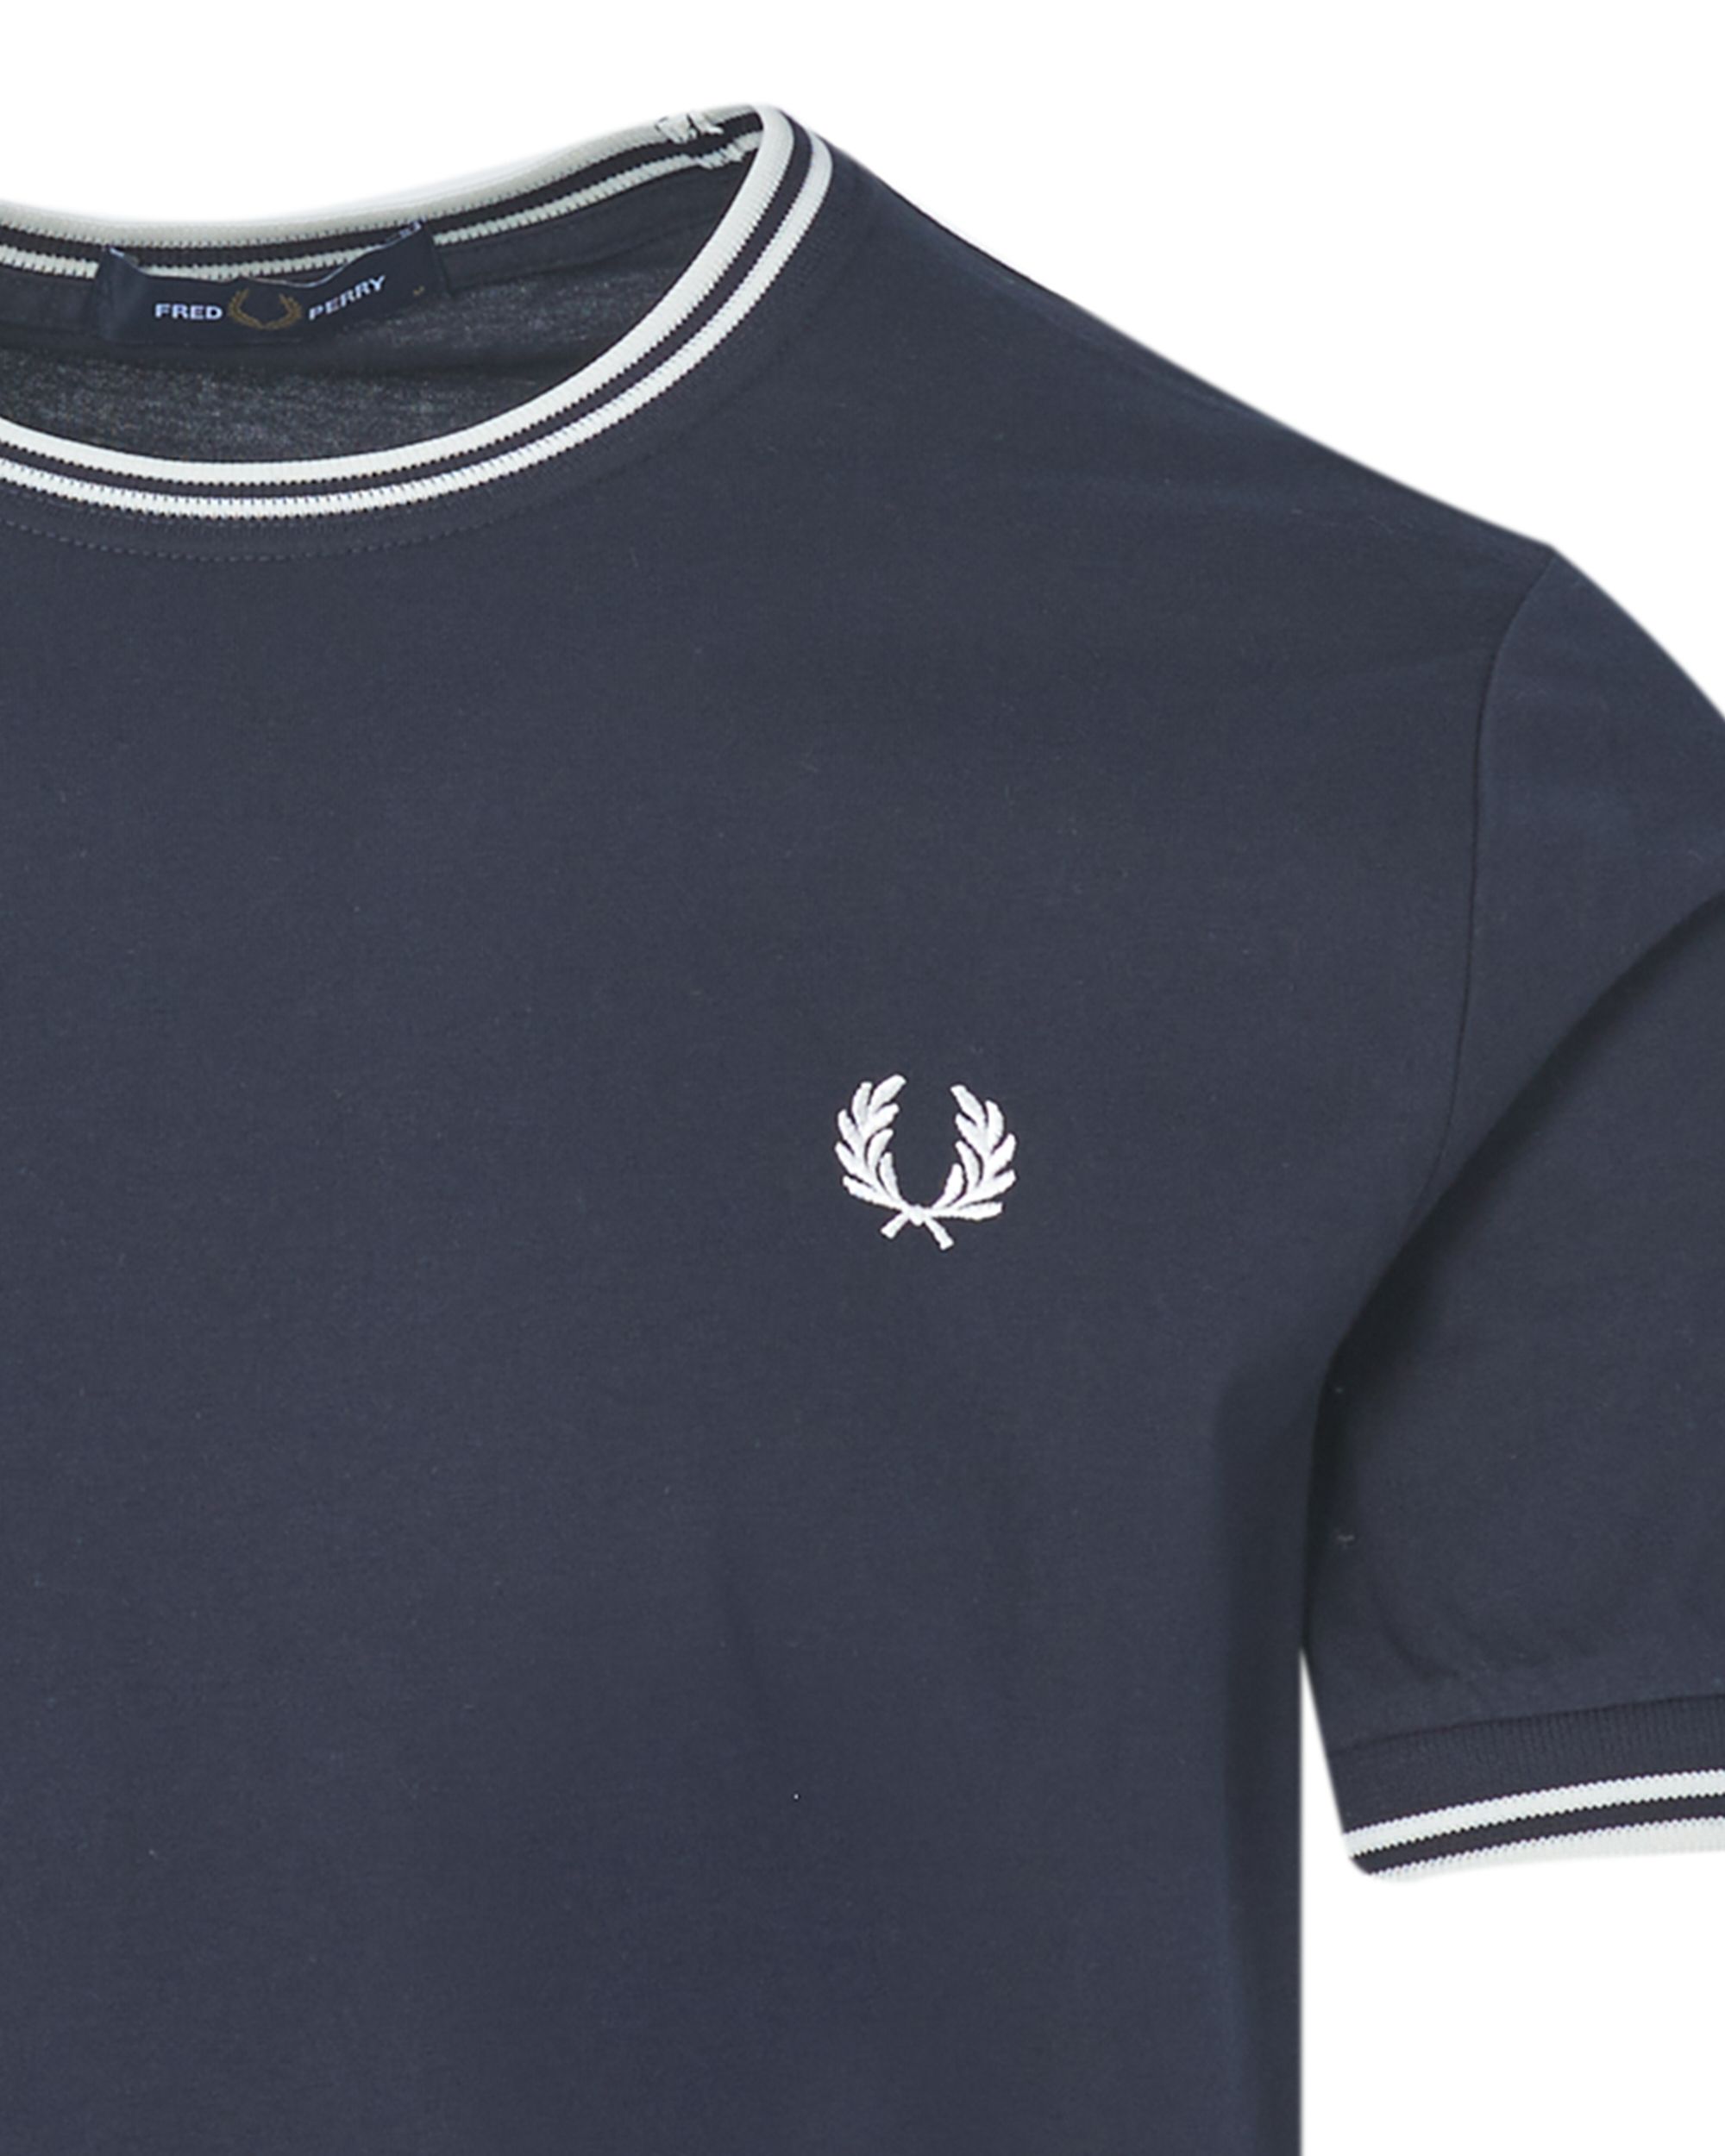 Fred Perry T-shirt KM Donker blauw 083512-001-L